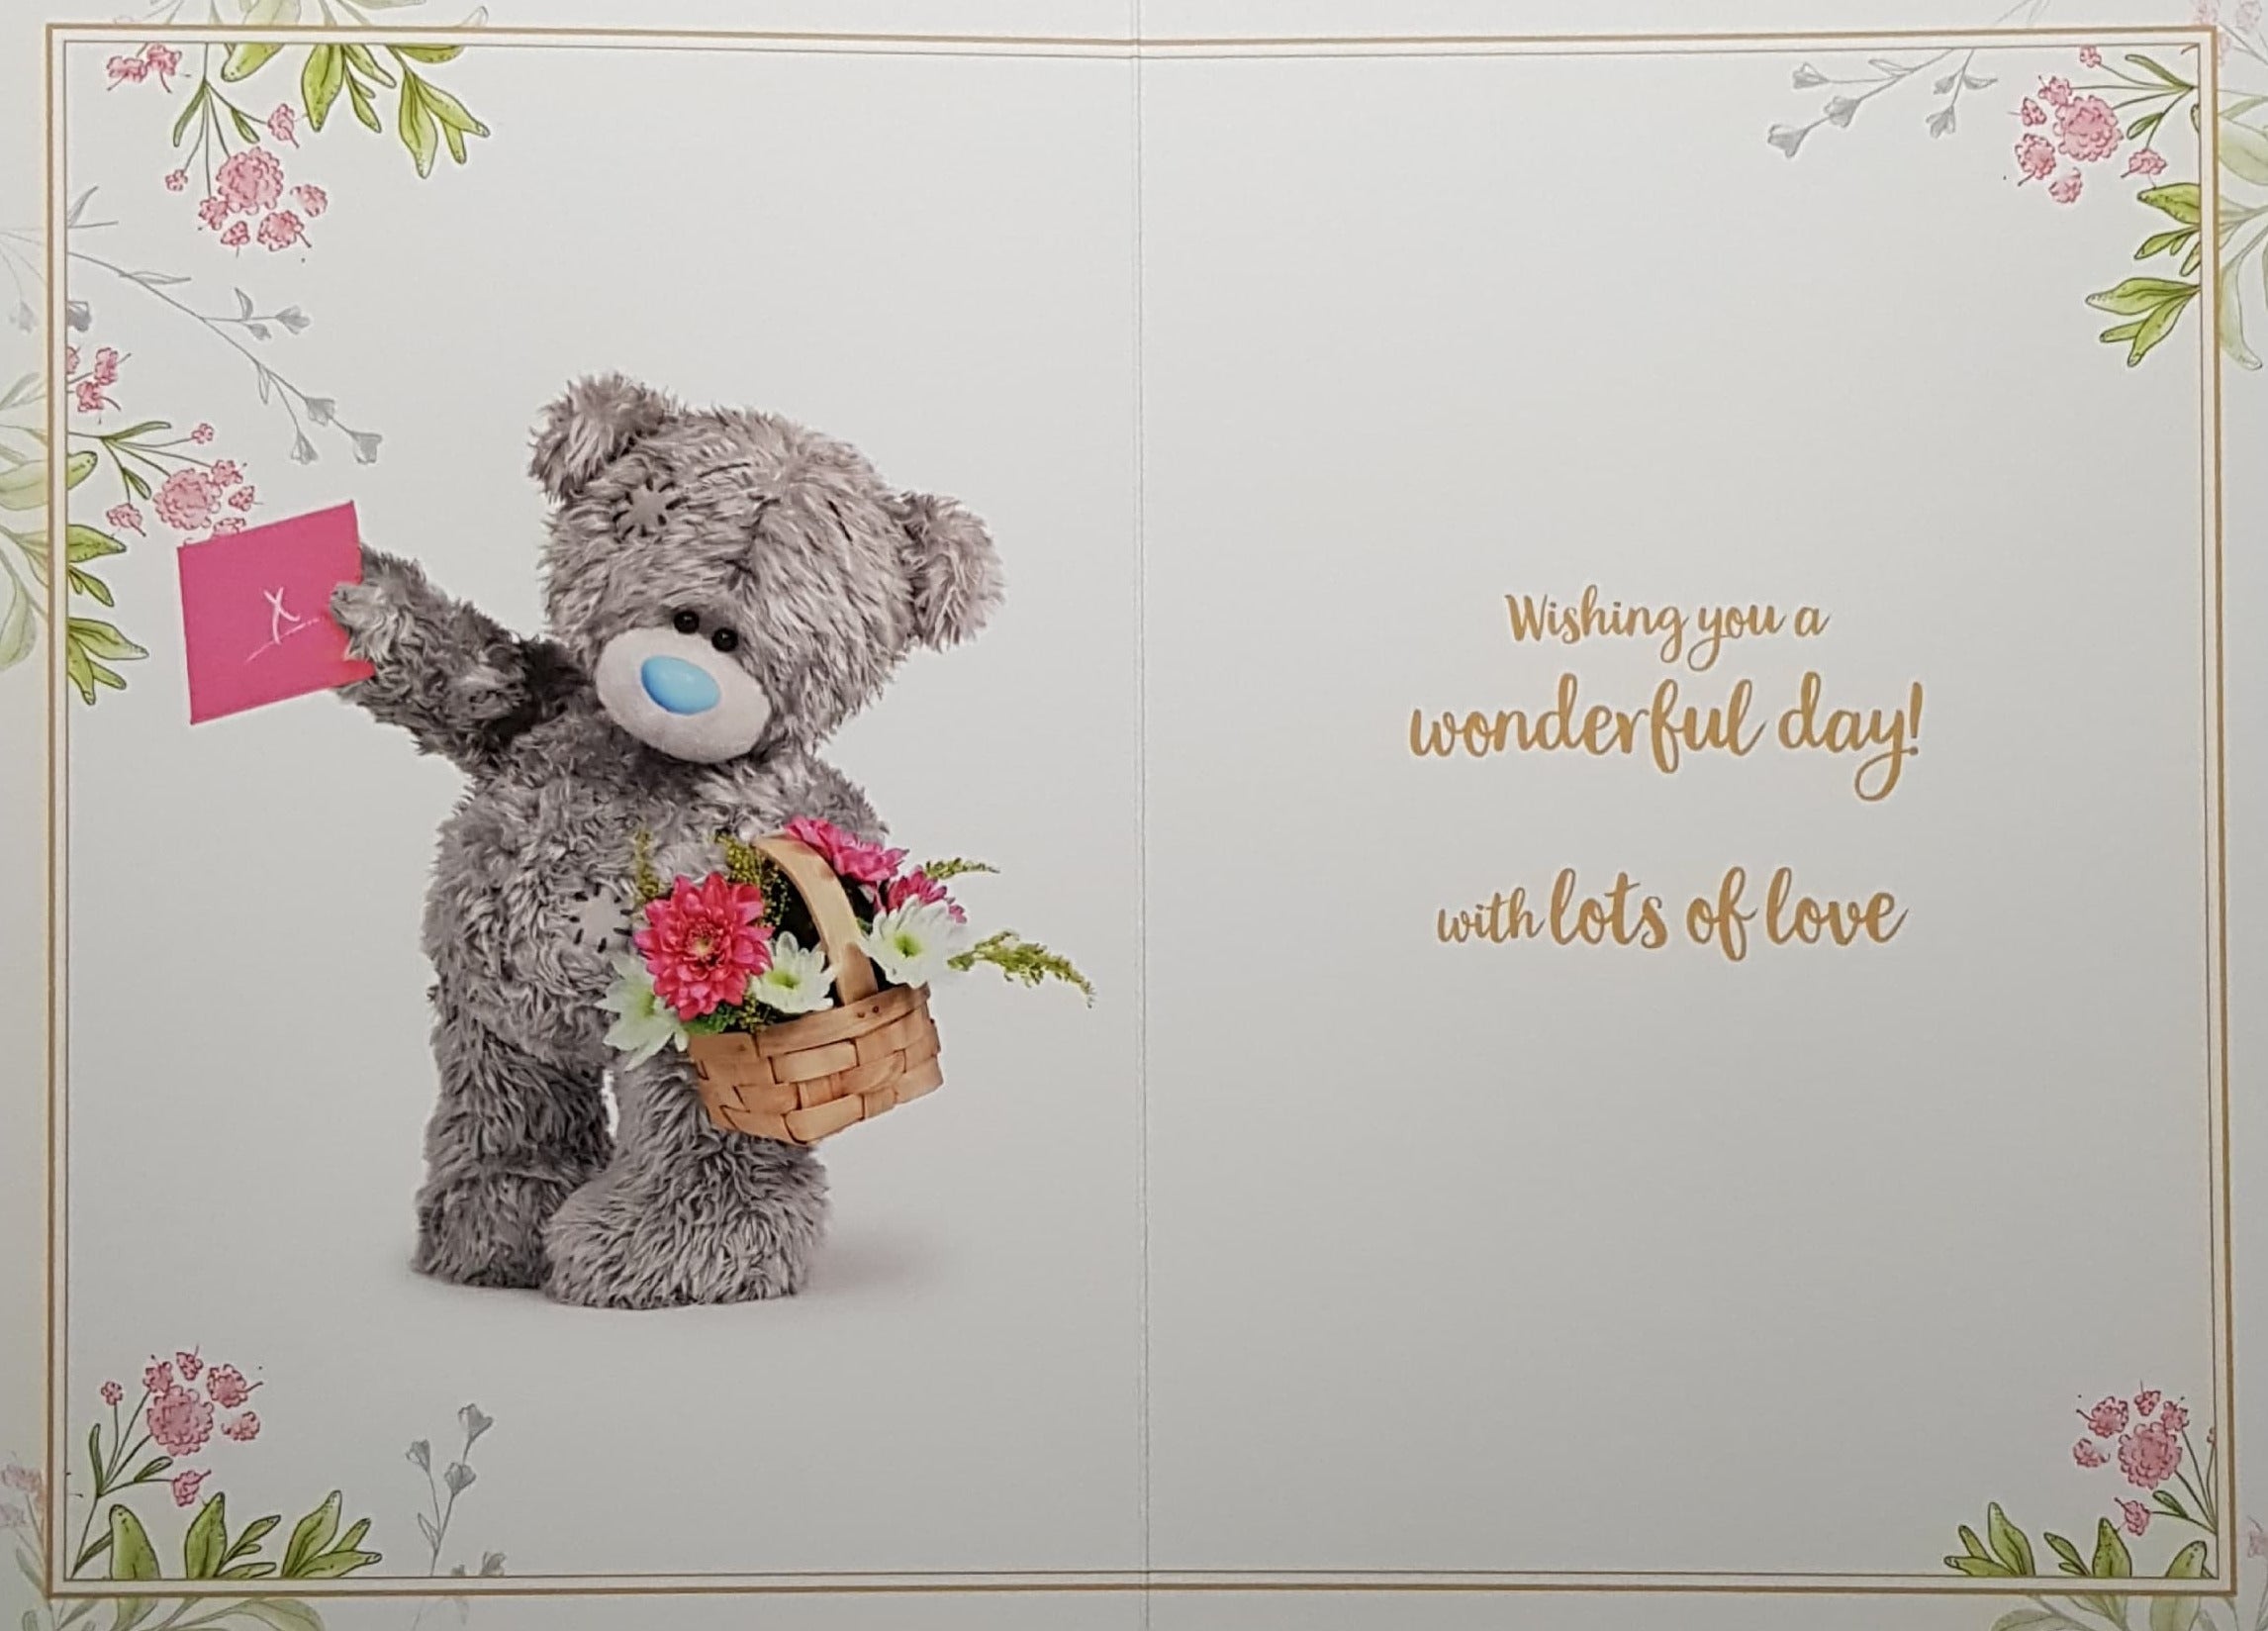 Birthday Card - Mum / Teddy Holding Out A Pink Envelope & A Flower Basket (3D Card)